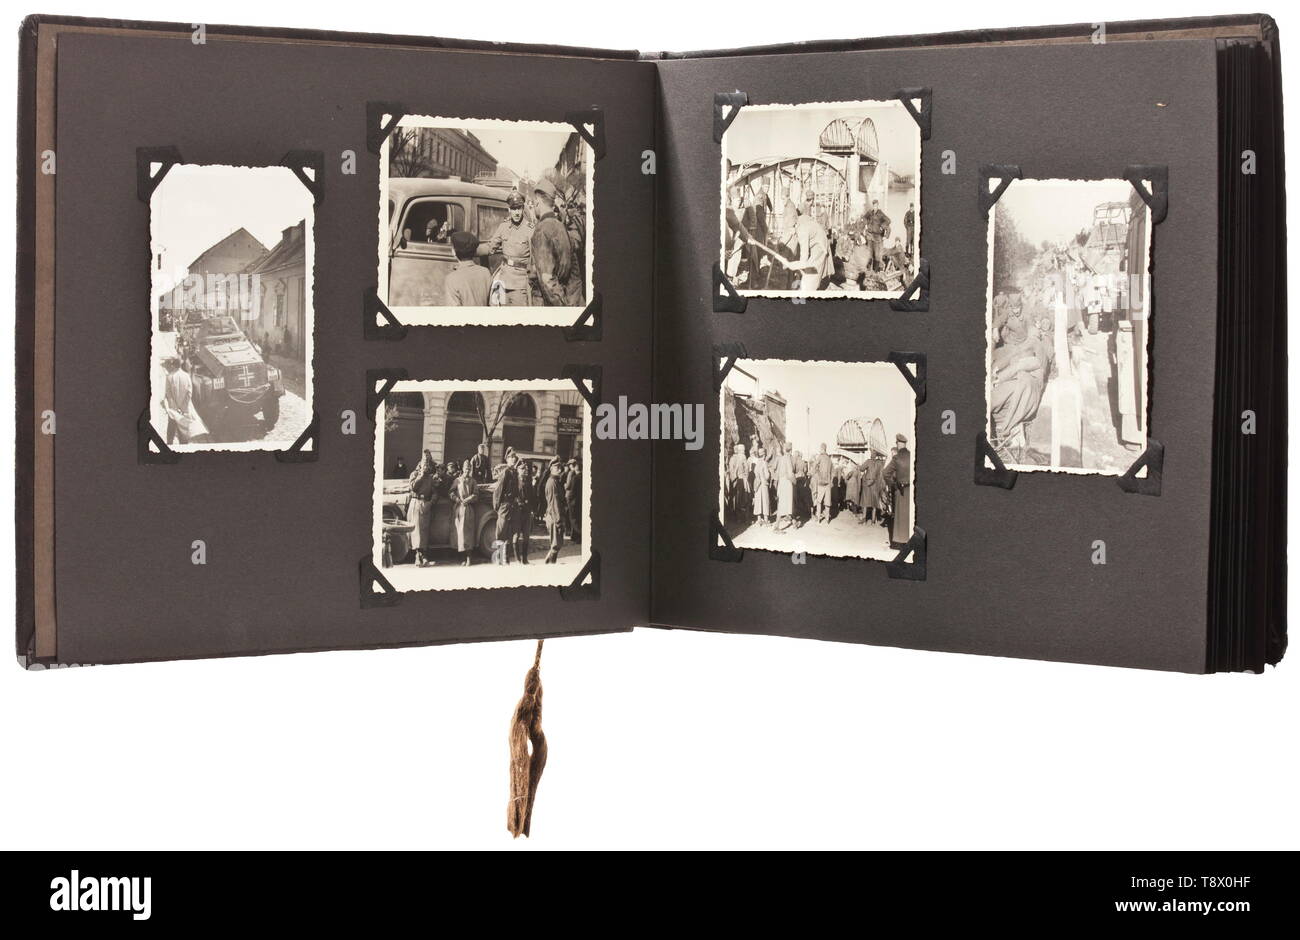 A photo album of Standartenführer Johannes Mühlenkamp - winner of the Oak Leaves to the Knight's Cross of the Iron Cross - Division 'Wiking' Album with 93 photos of various sizes, re-fastened with photo corners. Depicting technical gear and vehicles, buildings and villages, SS parade in the East, military equipment, tanks and motorcycles, regiments and many other scenes. Johannes Mühlenkamp was commander of the 5th SS Panzer Division and received the Oak Leaves to the Knight's Cross of the Iron Cross on 21 September 1944. historic, historical, 20th century, 1930s, 1940s, Wa, Editorial-Use-Only Stock Photo